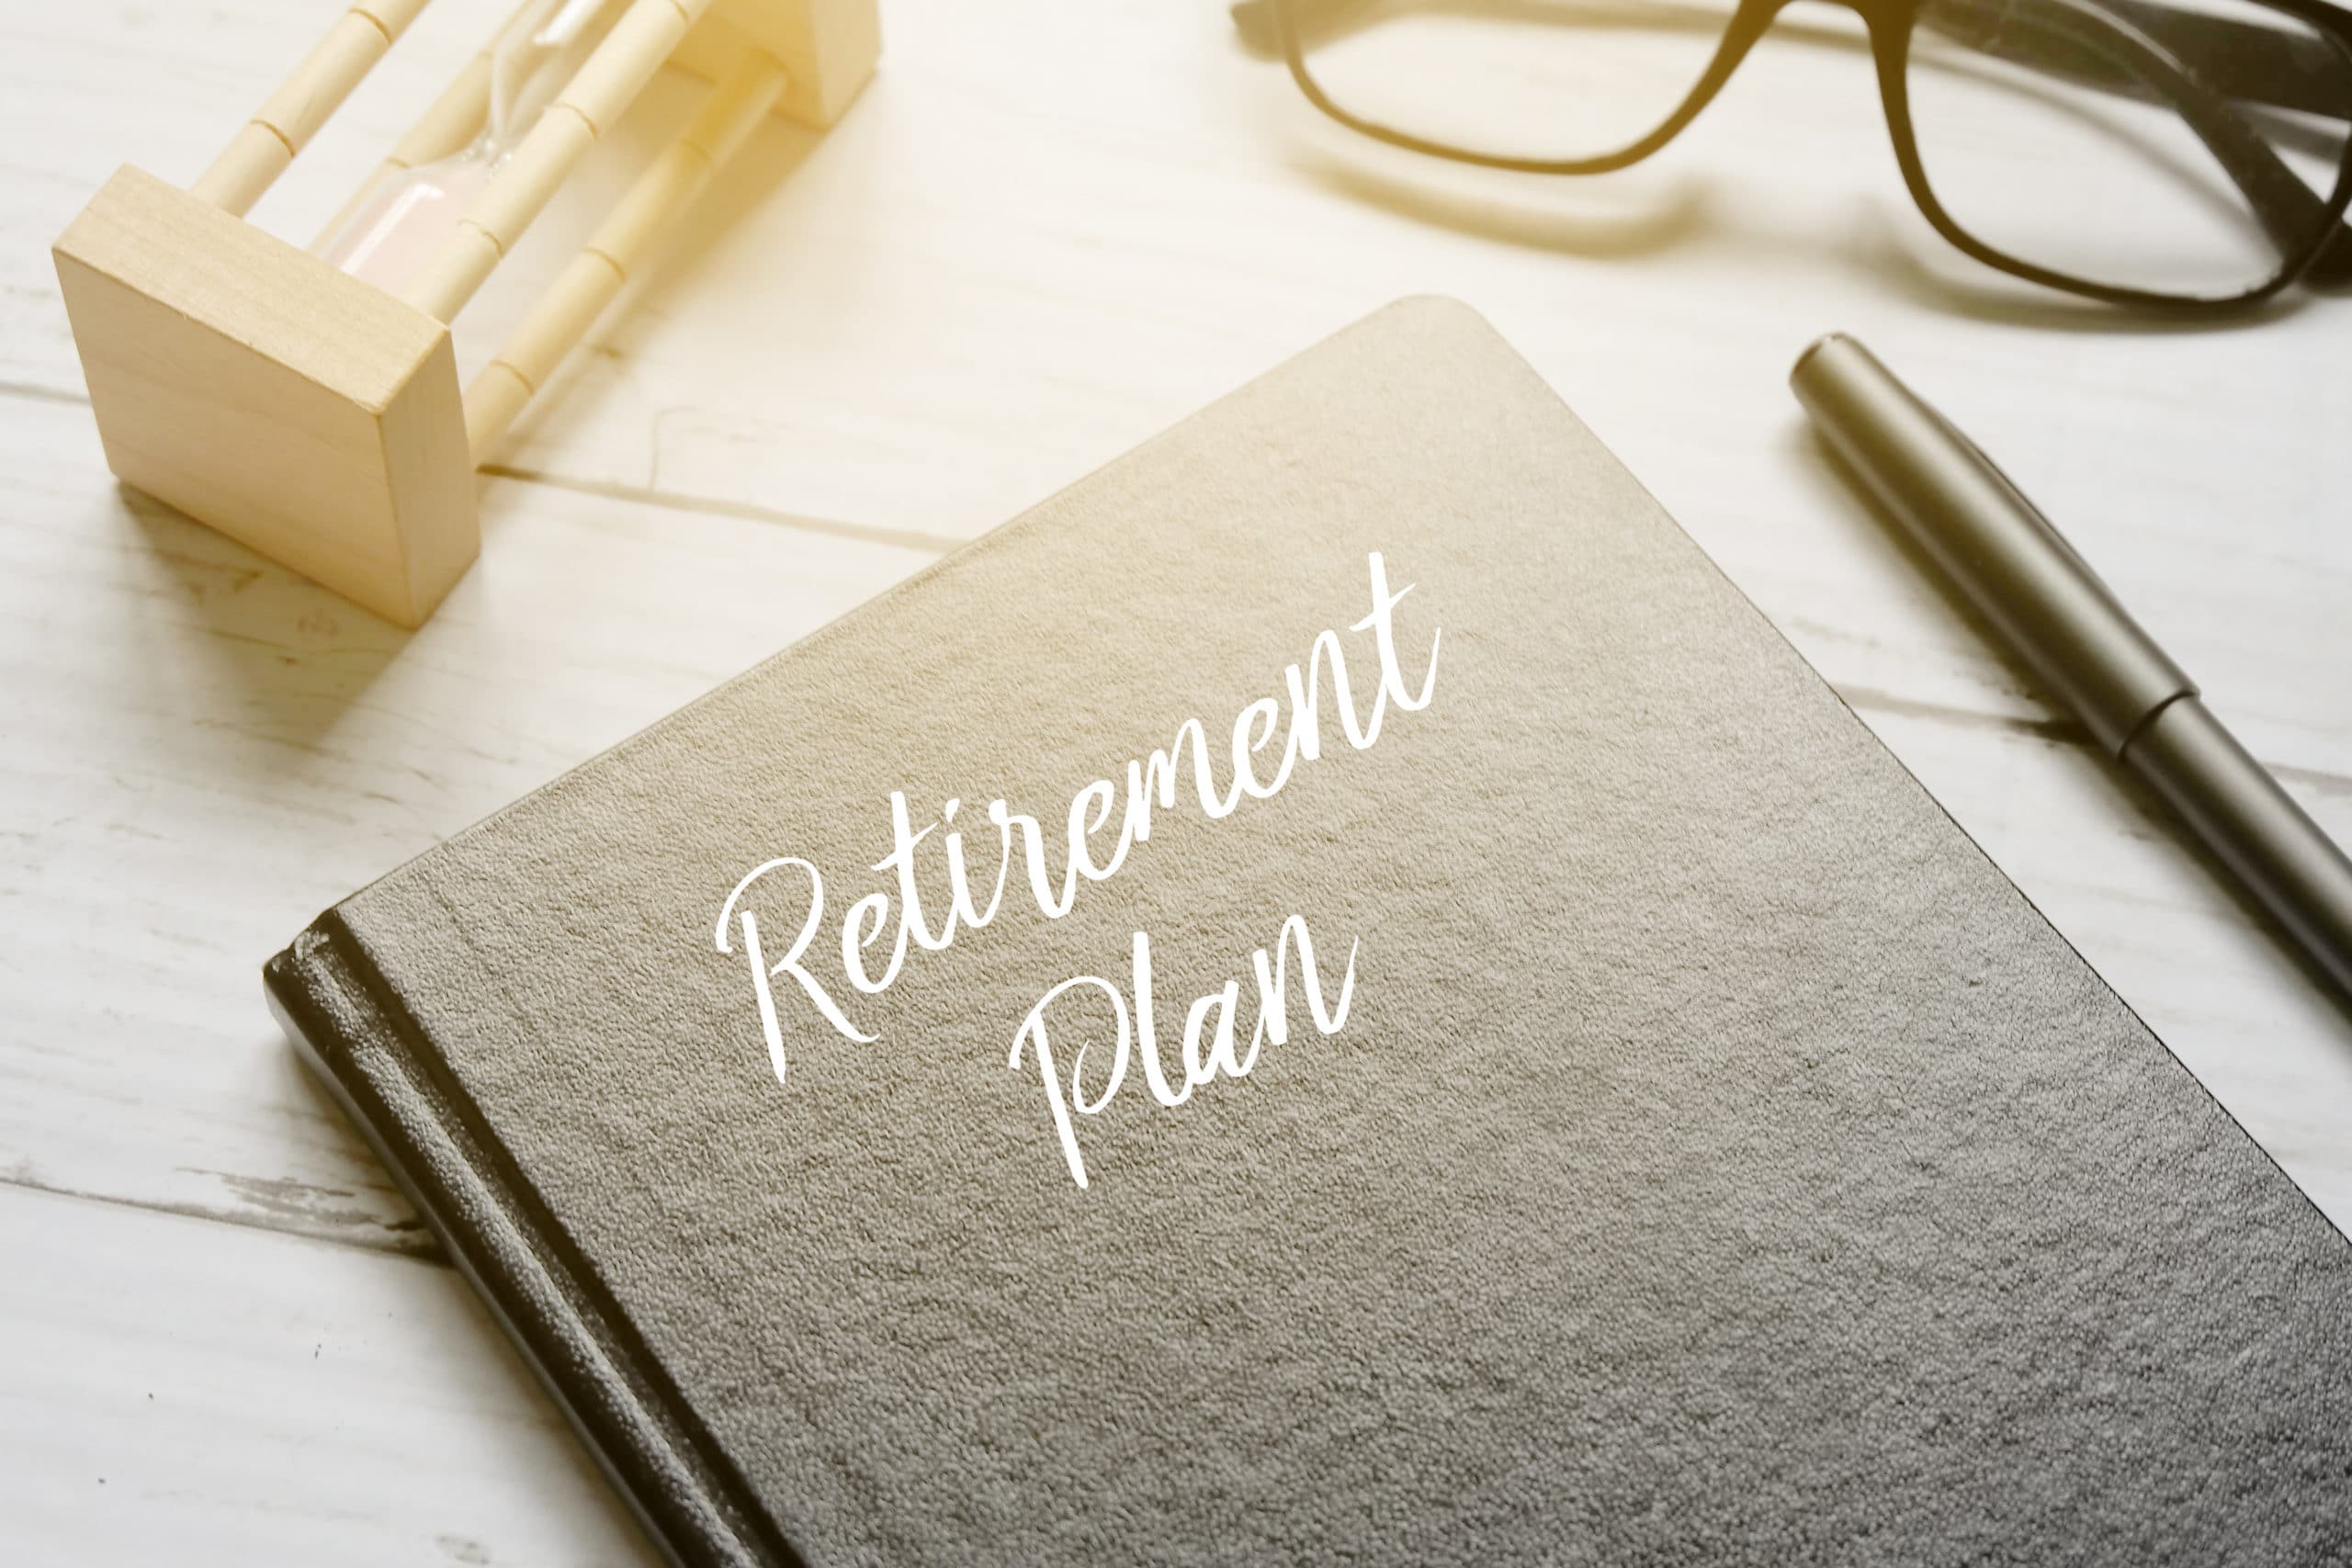 Tax Changes To Retirement Plans